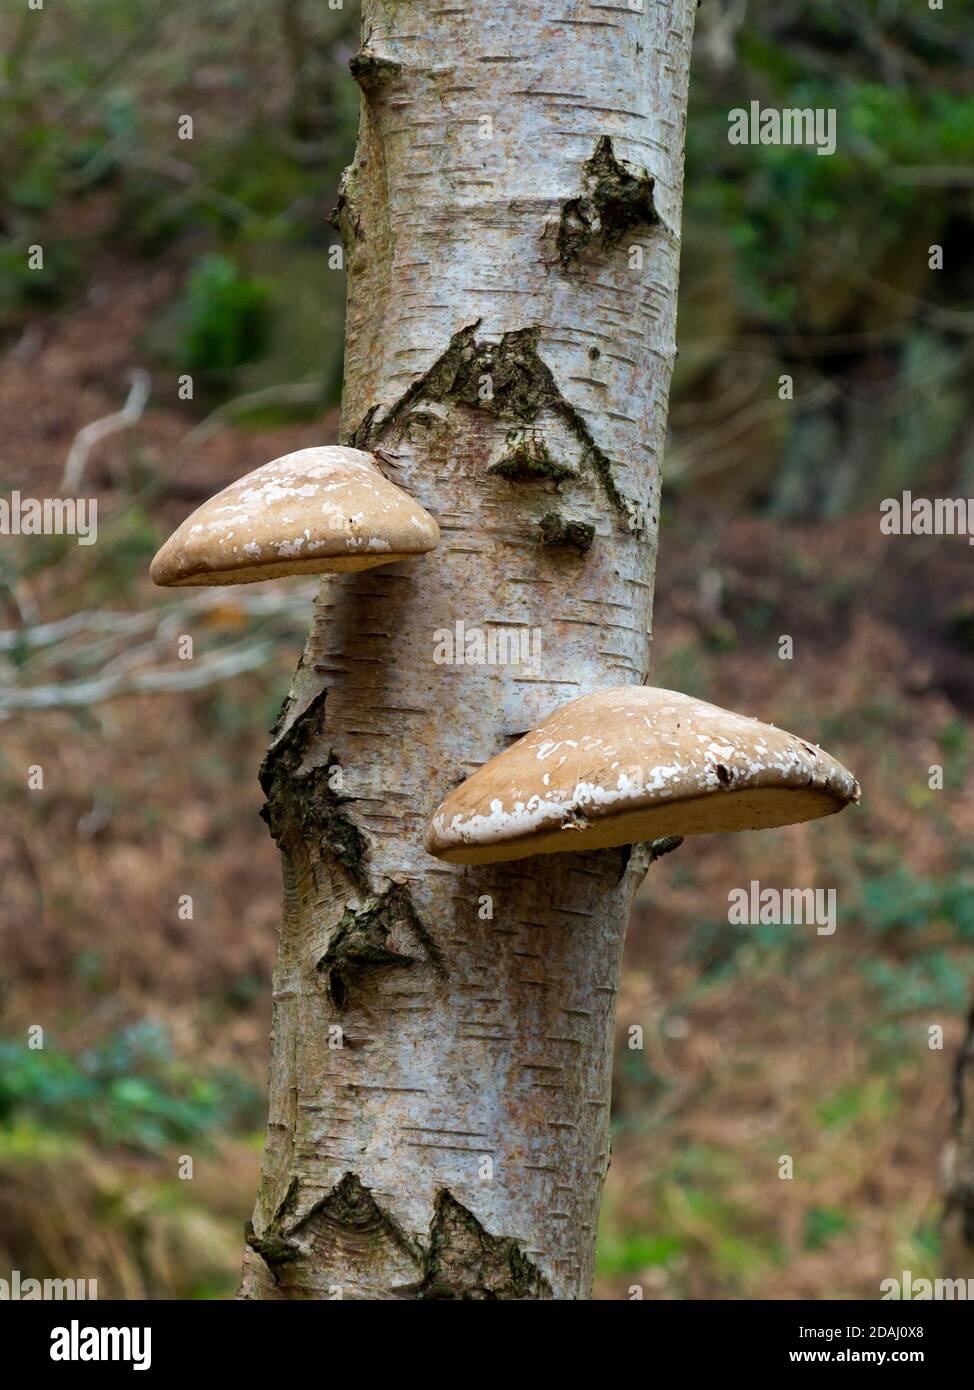 Bracket or shelf fungi growing on a tree branch these are also known as conks and polypores. Stock Photo